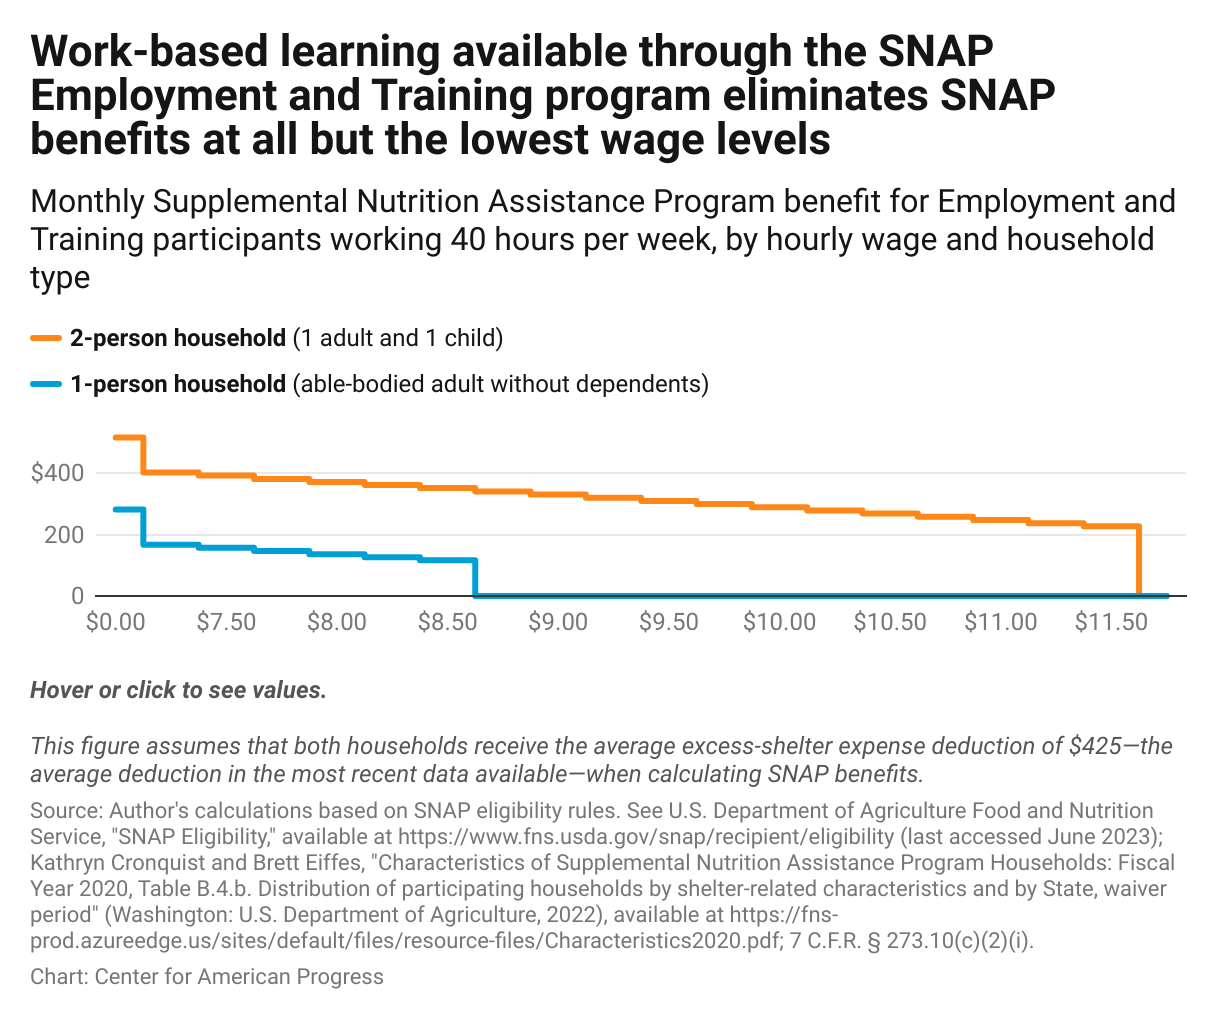 Line graph of the level of SNAP benefits an able-bodied adult without dependents and a two-person household with a child would receive working 40 hours per week in the SNAP Employment and Training program, showing that benefits would be cut to $0 at an hourly wage of $8.75 and $11.75, respectively.